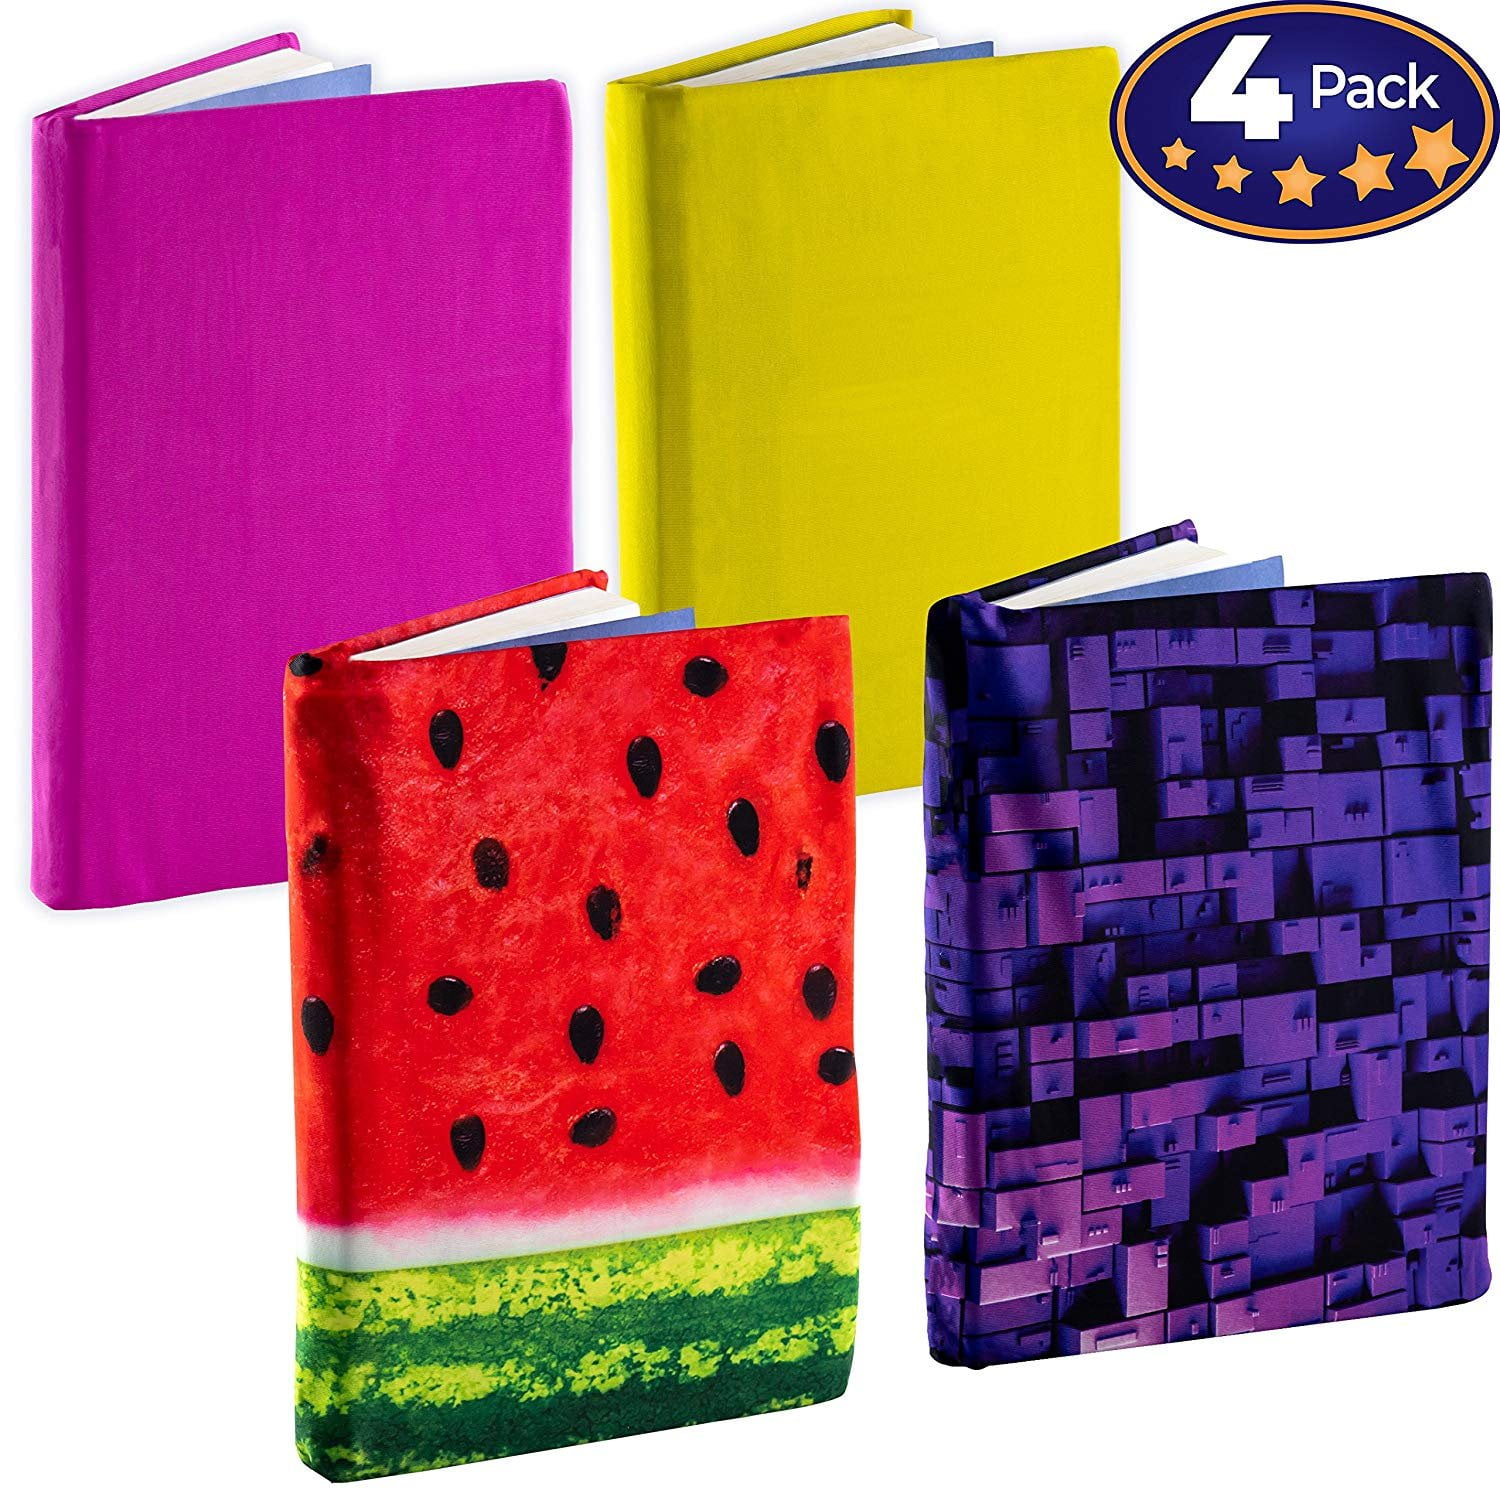 CHOOSE COLOR New 4 PACK Stretchable Fabric Book Covers 